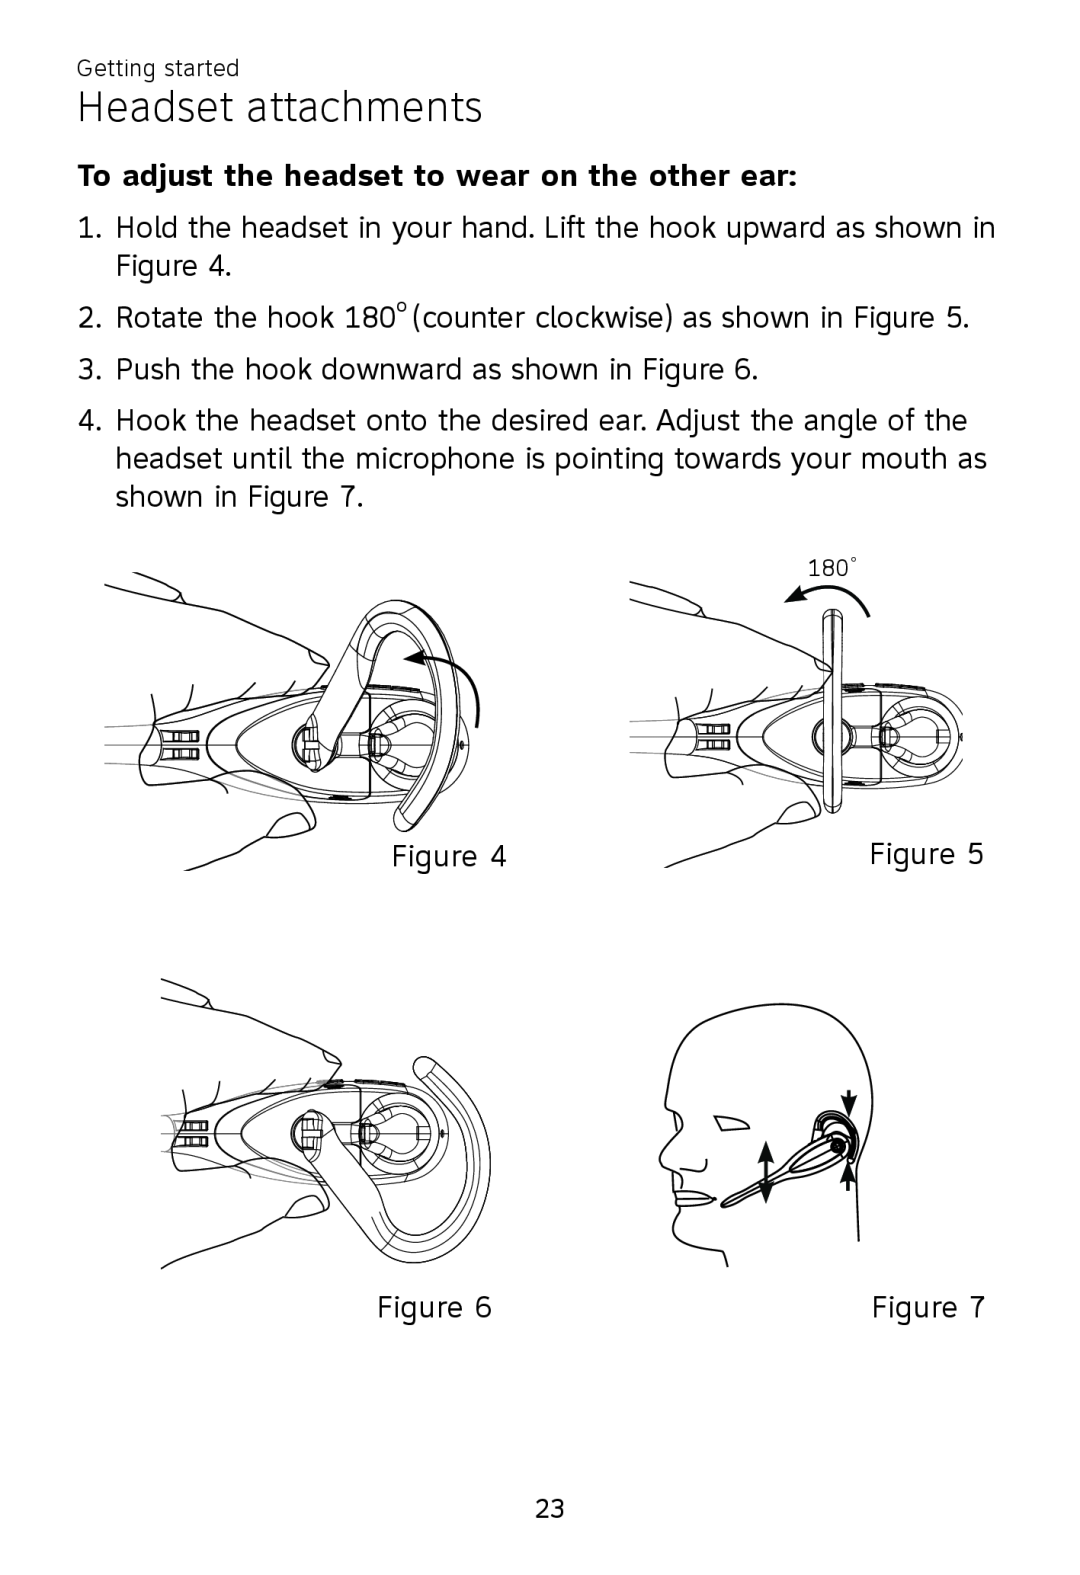 AT&T TL 7610 user manual To adjust the headset to wear on the other ear, Headset attachments 